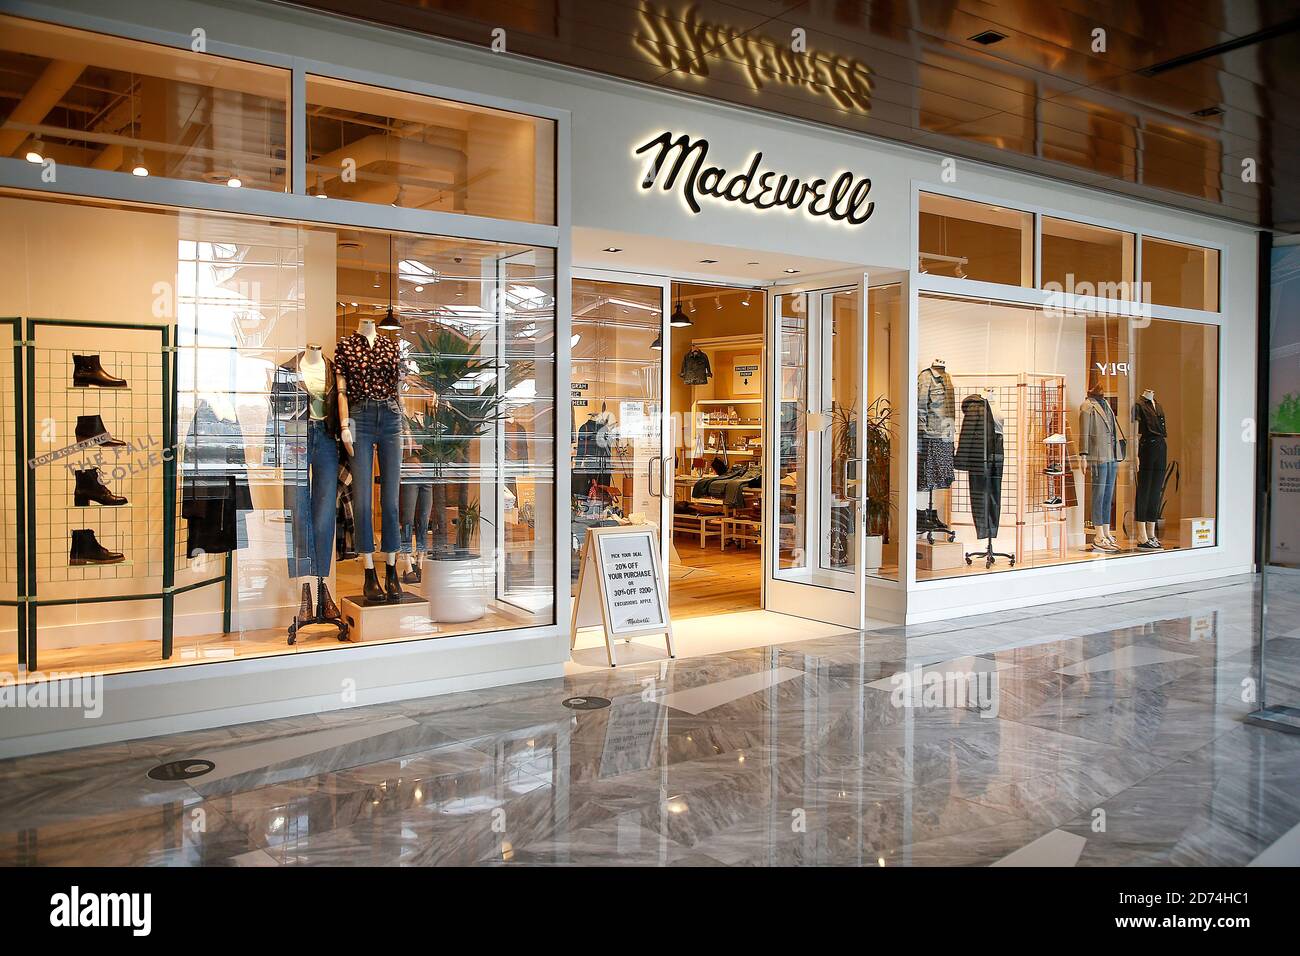 Madewell logo and store seen in Hudson Yards. Stock Photo